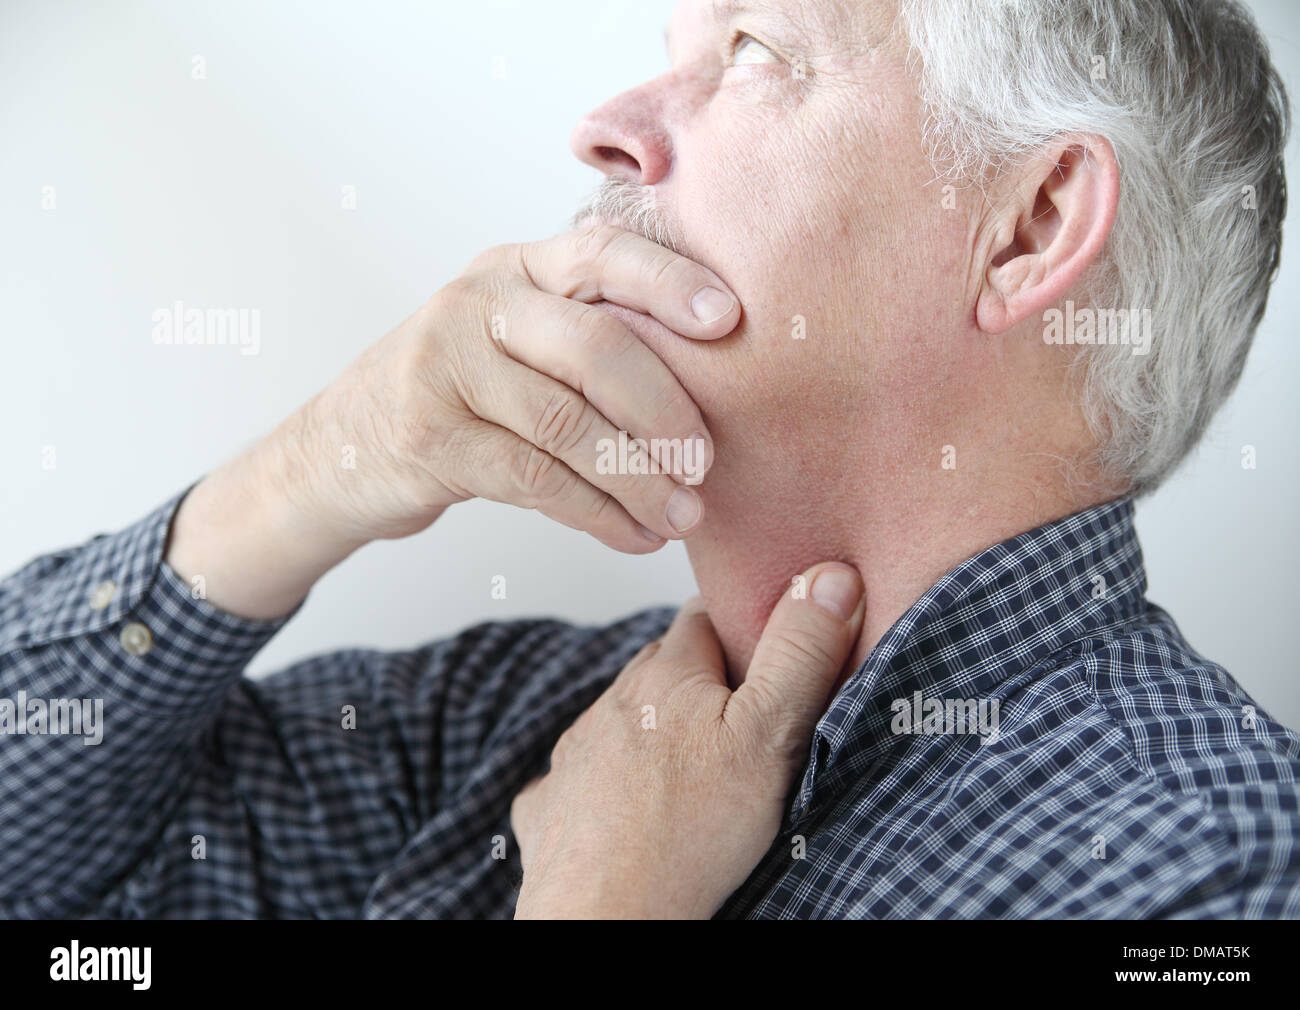 man with throat or neck problems Stock Photo